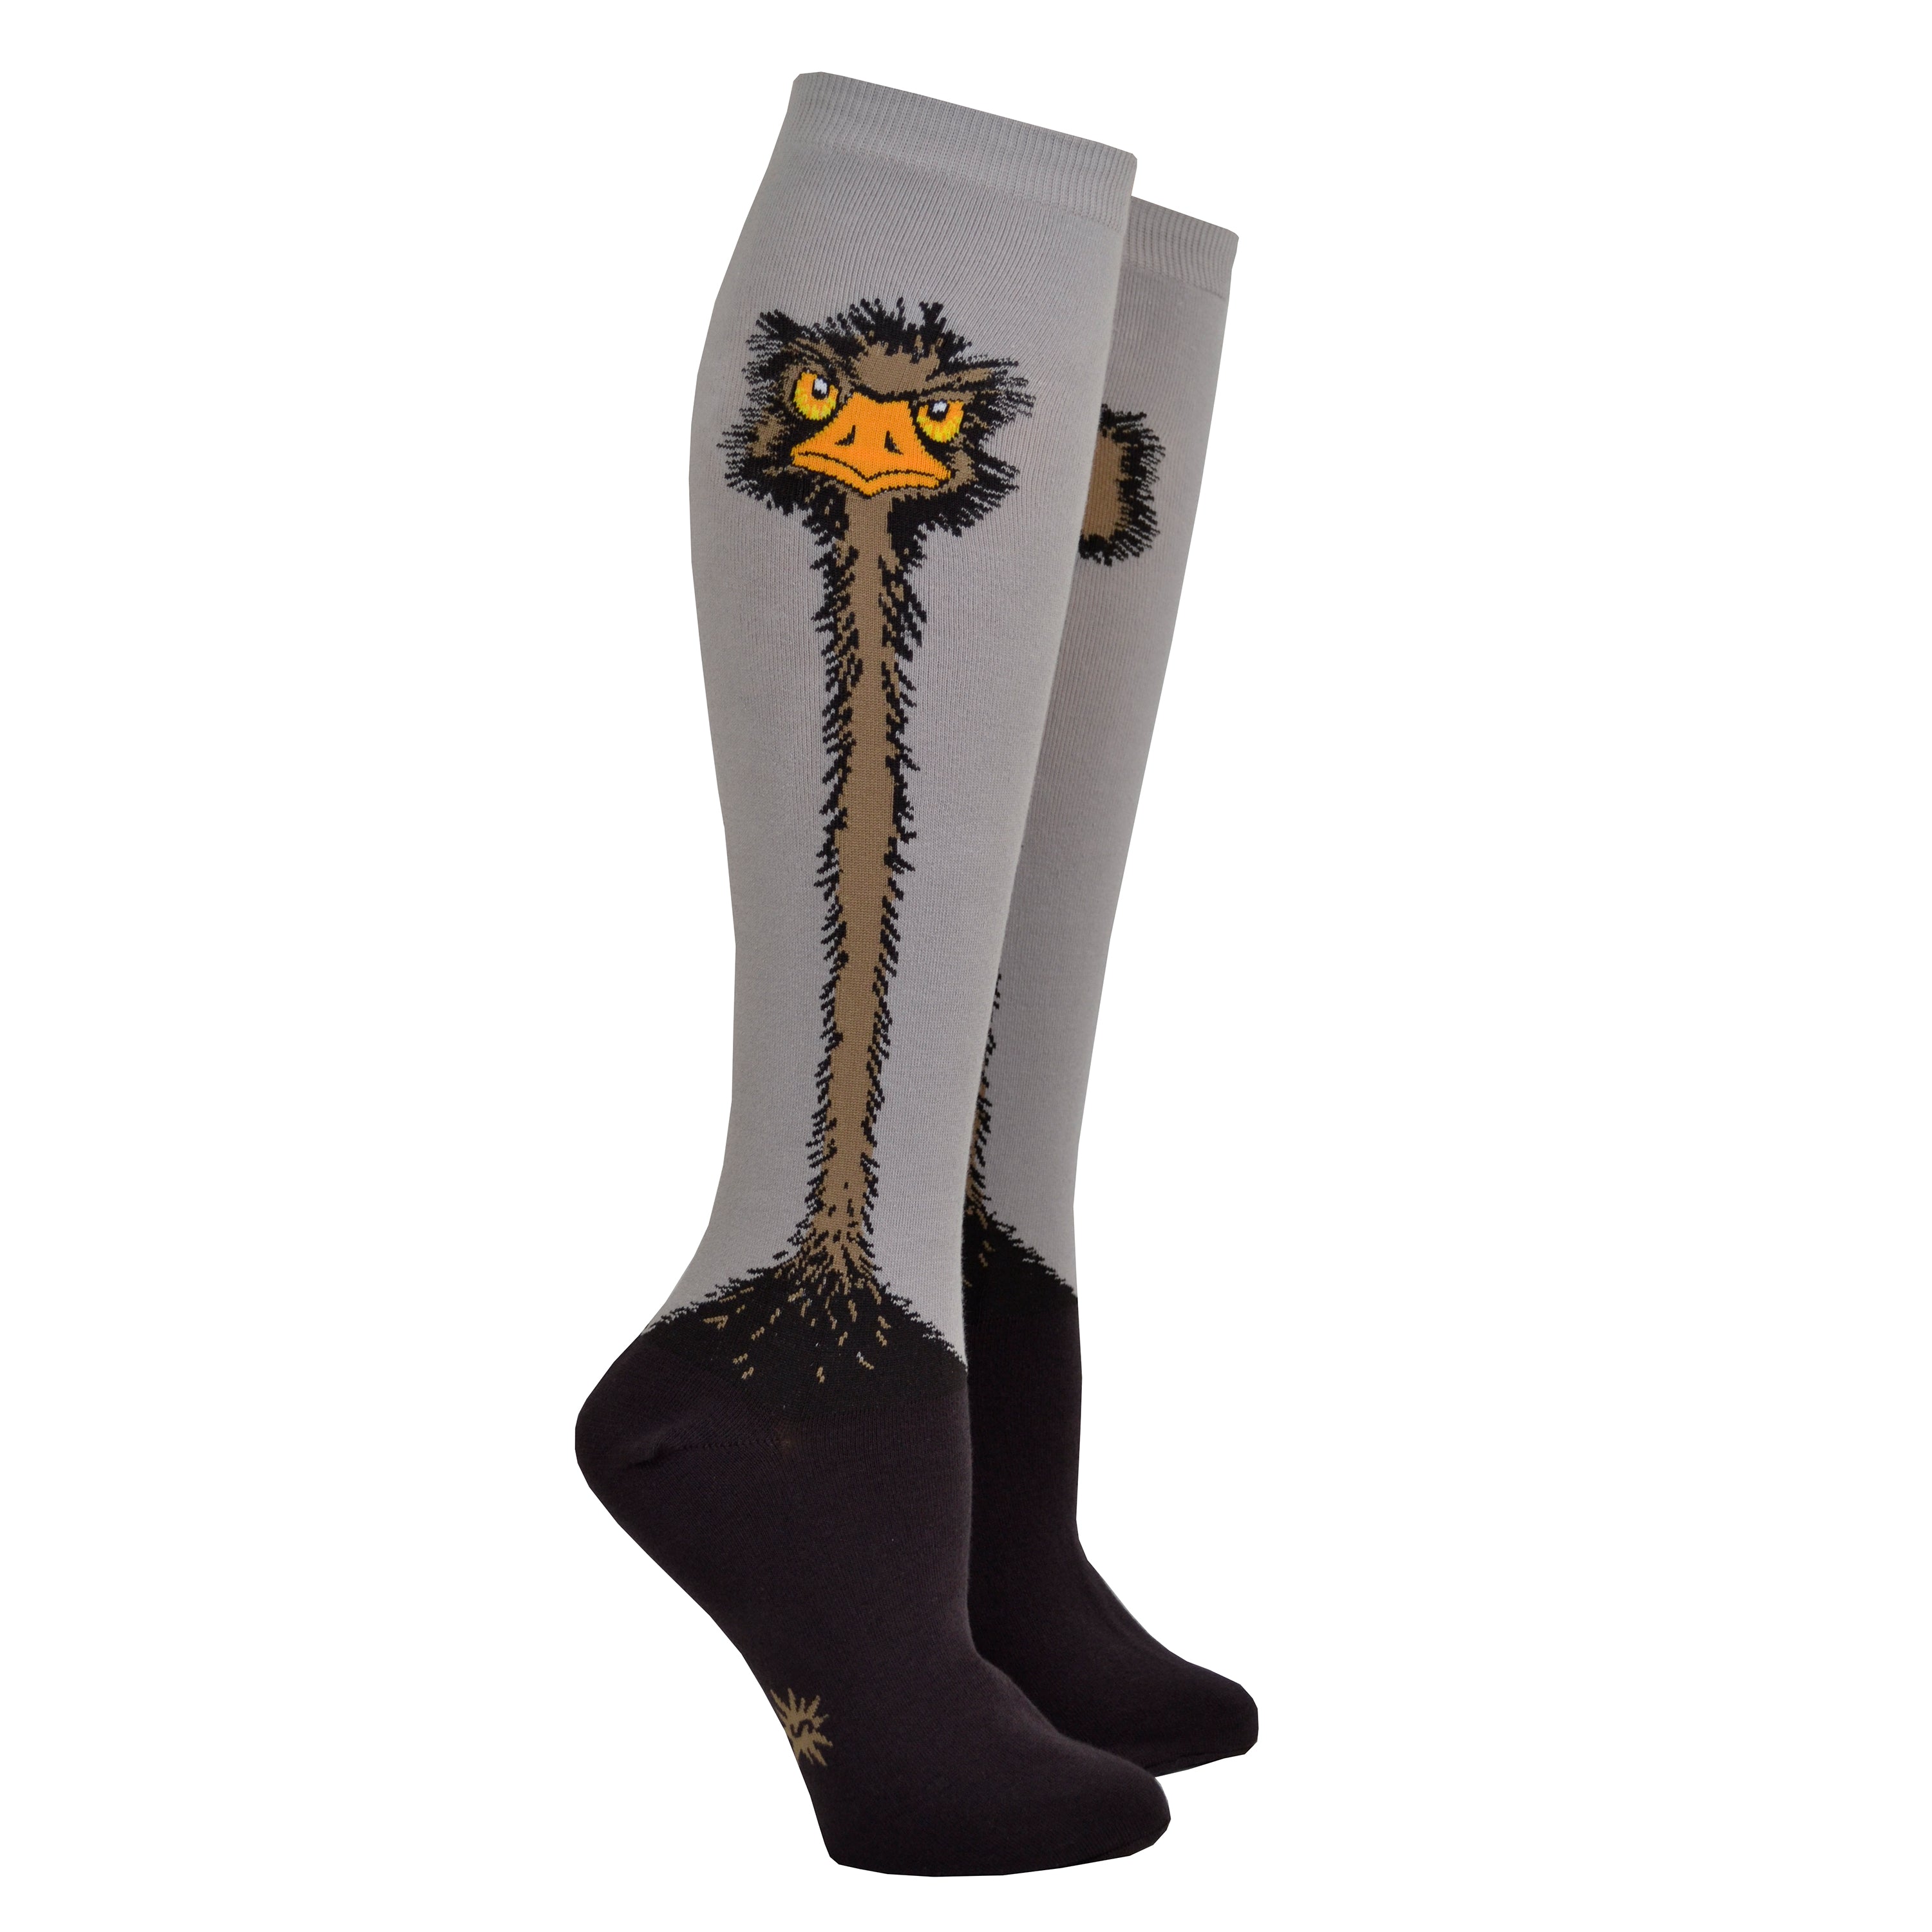 Shown on leg forms, a pair of Sock It To Me brand Stretch It cotton knee high socks in grey and black. The leg of the sock is grey with a cartoon ostrich design going down the leg and transitioning into the black foot